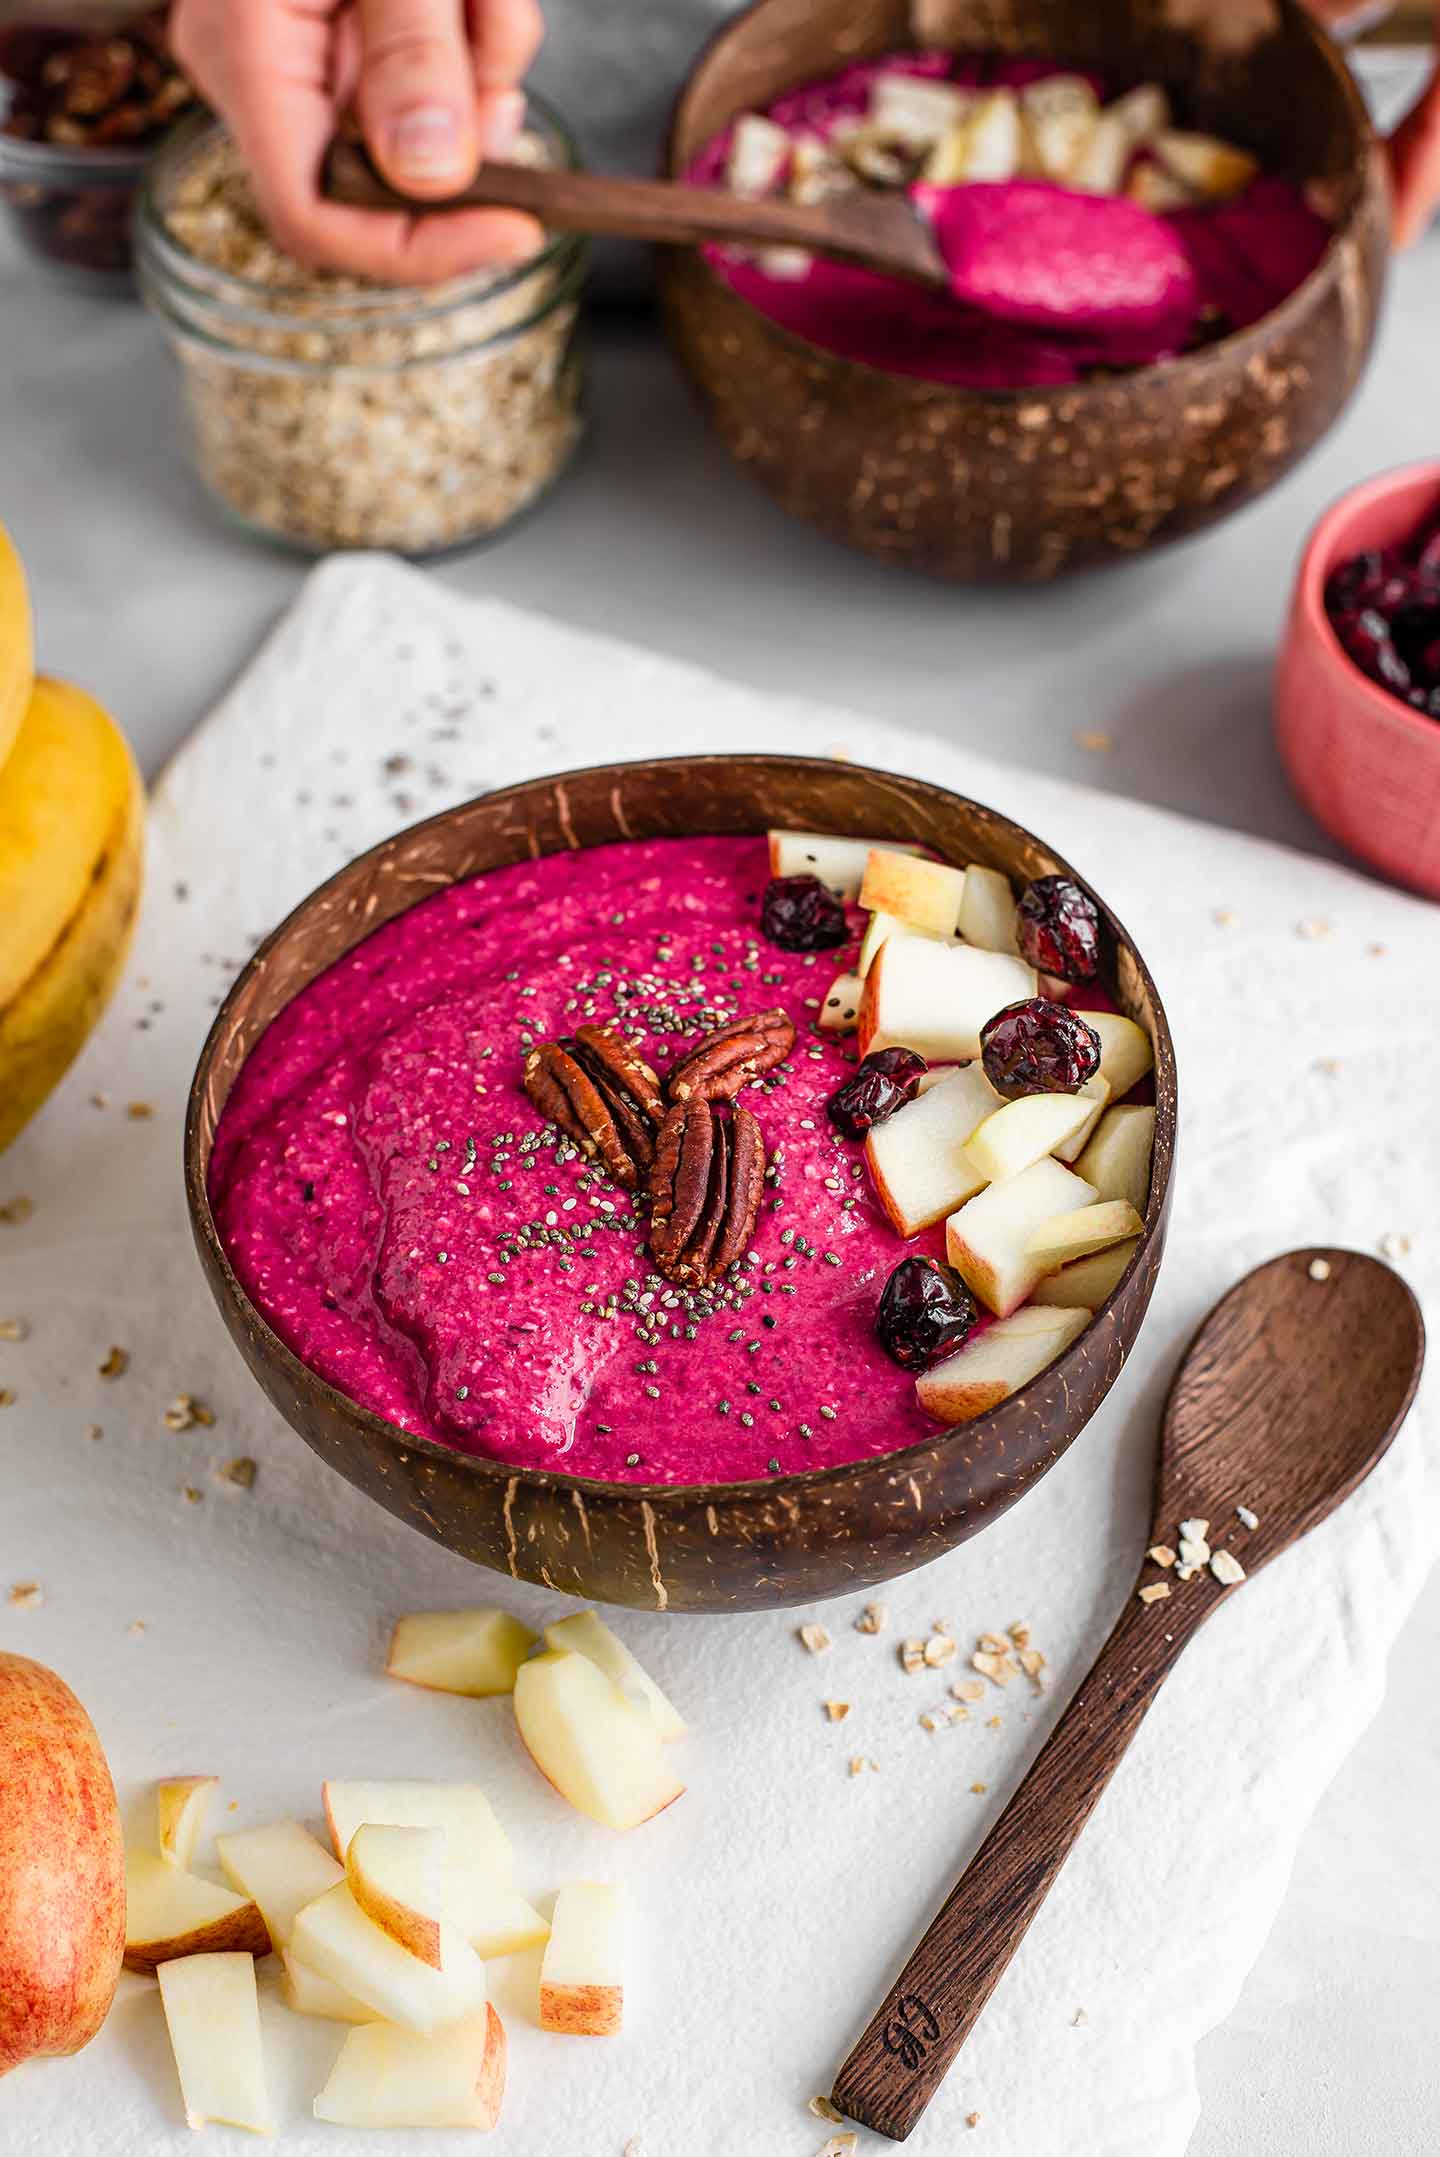 Top down view of a beet apple smoothie bowl with a wooden spoon laying next to it on a white tray. Ingredients are scattered around.